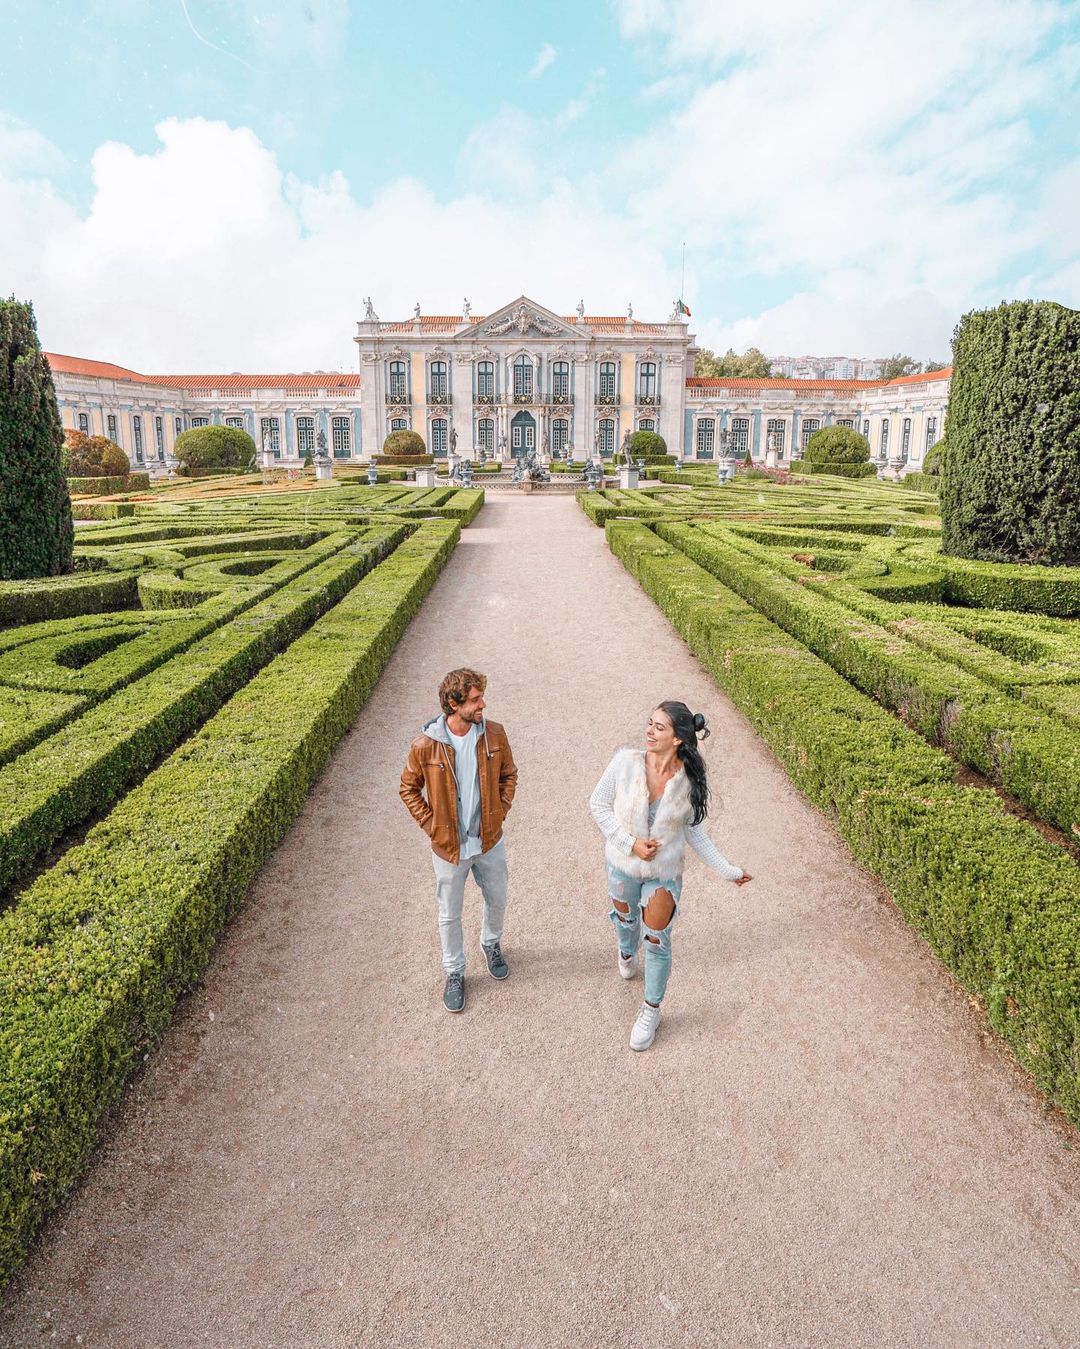 Queluz Palace - 10 Must-See Attractions in Sintra